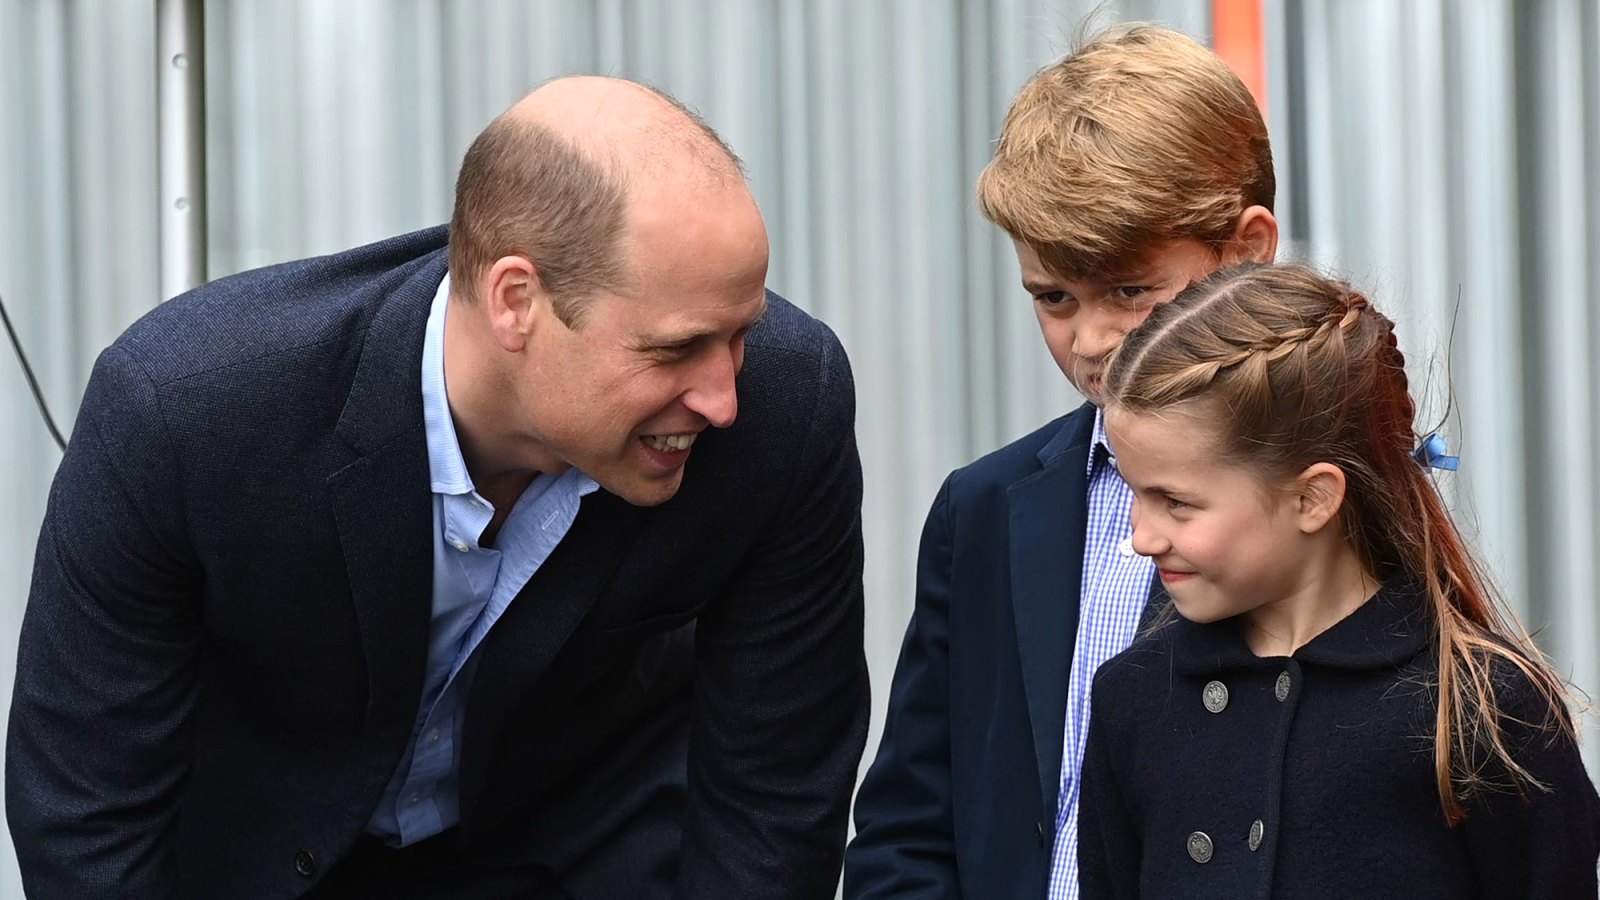 Prince William and Princess Charlotte Cheer on U.K. Women's Soccer Team Ahead of Euro Championship: 'I Hope You Win'